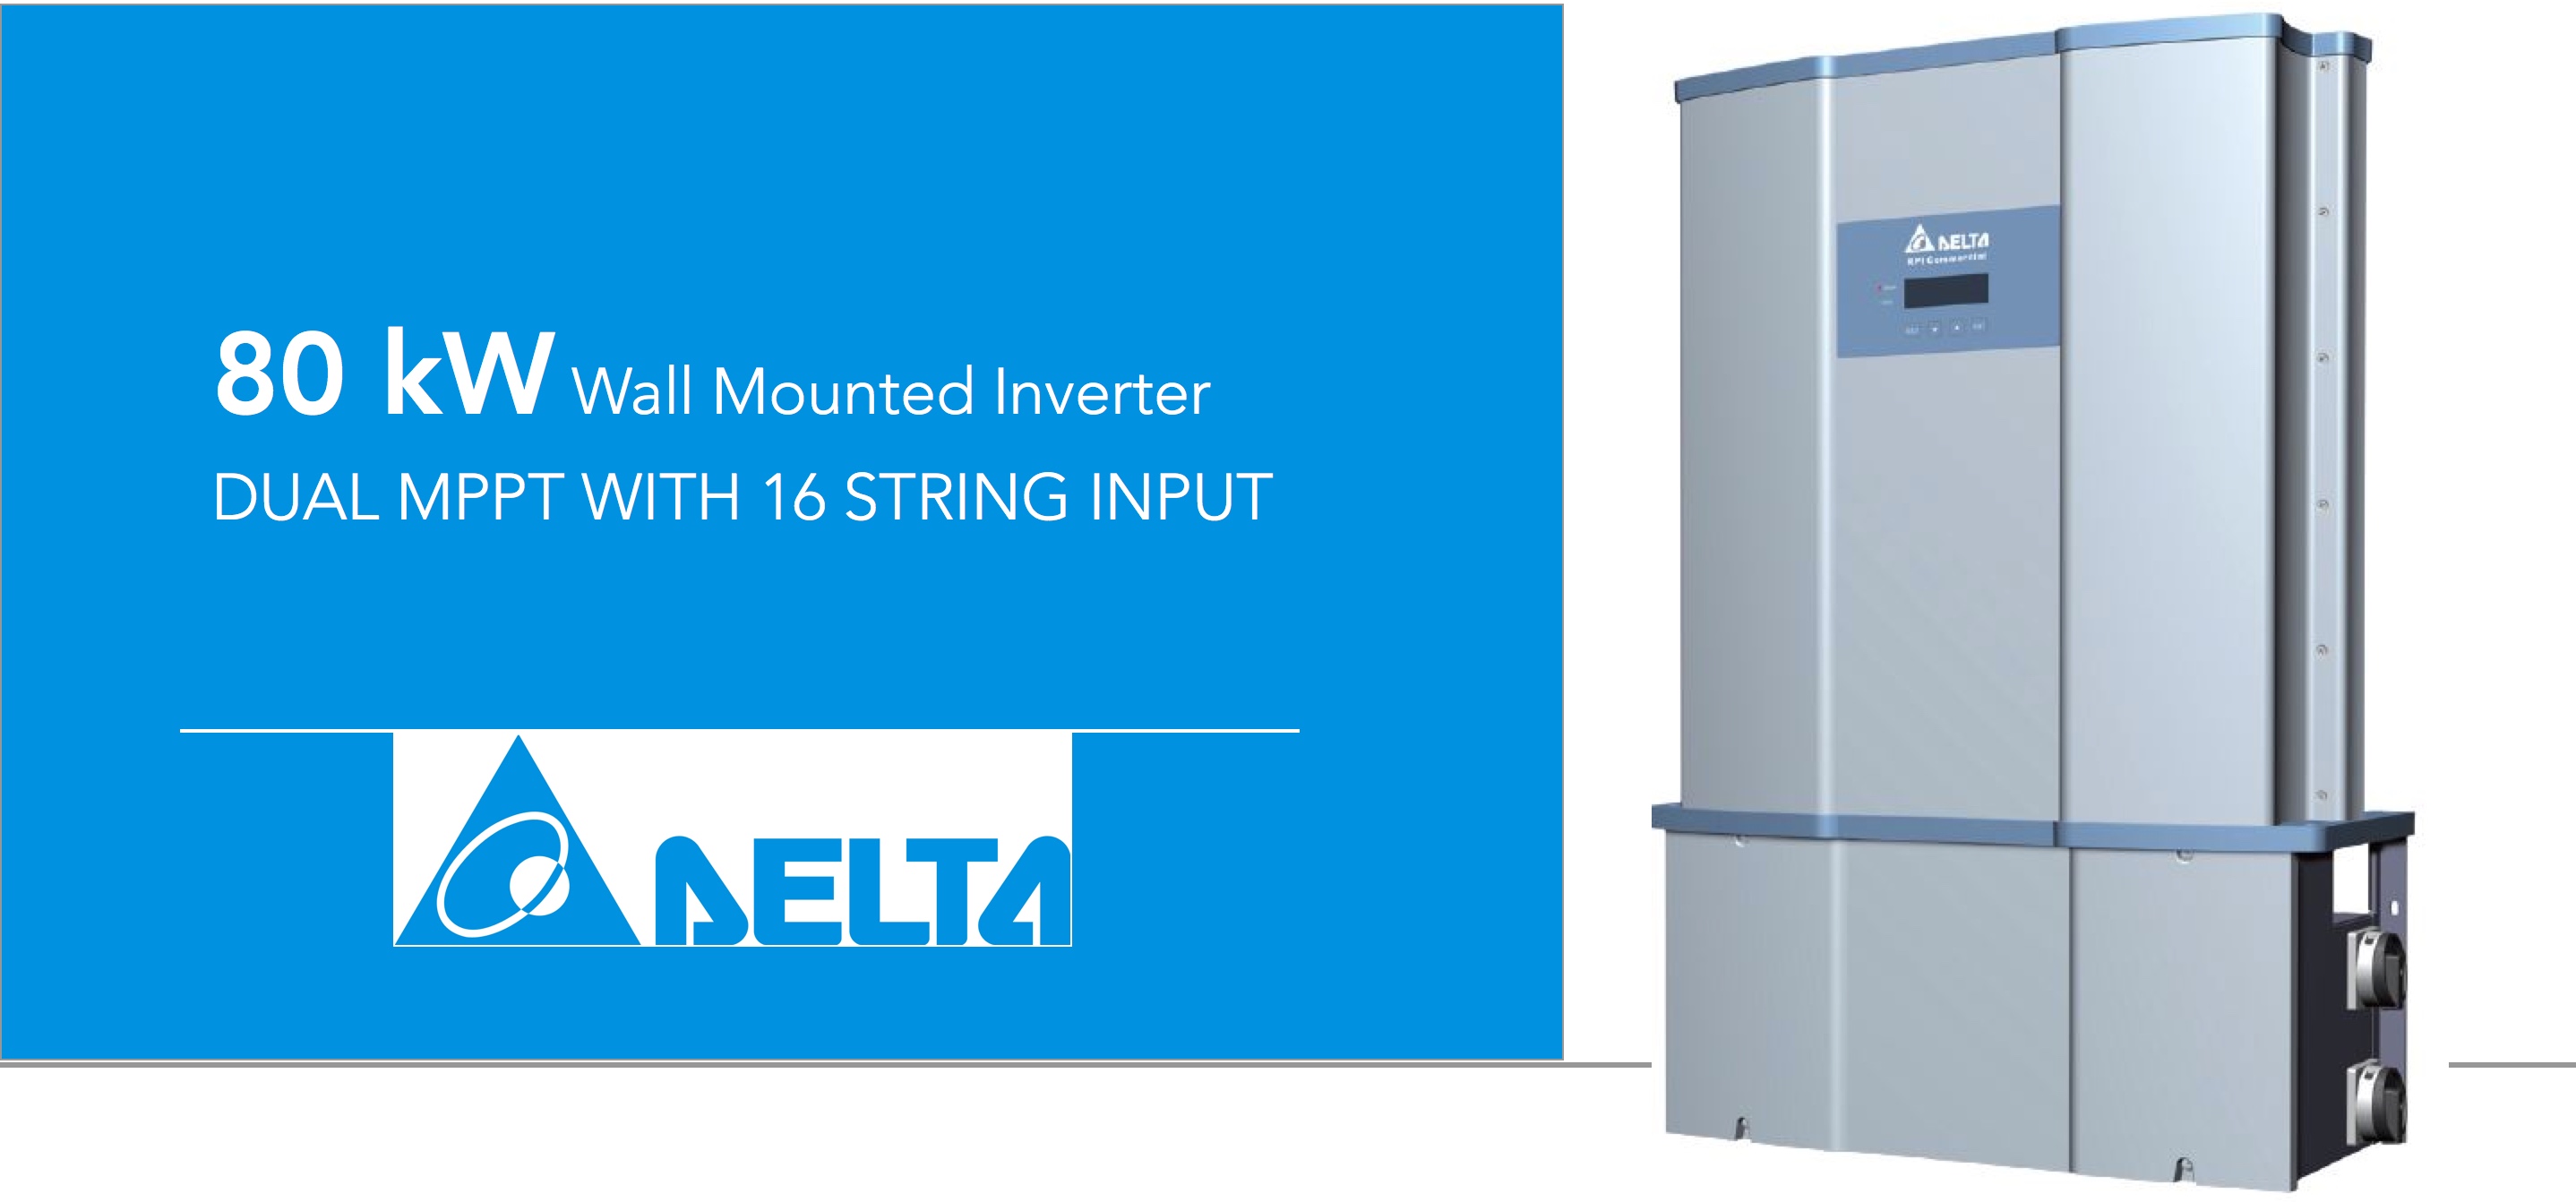 Delta RPI 80kW Inverter Launching in South Africa